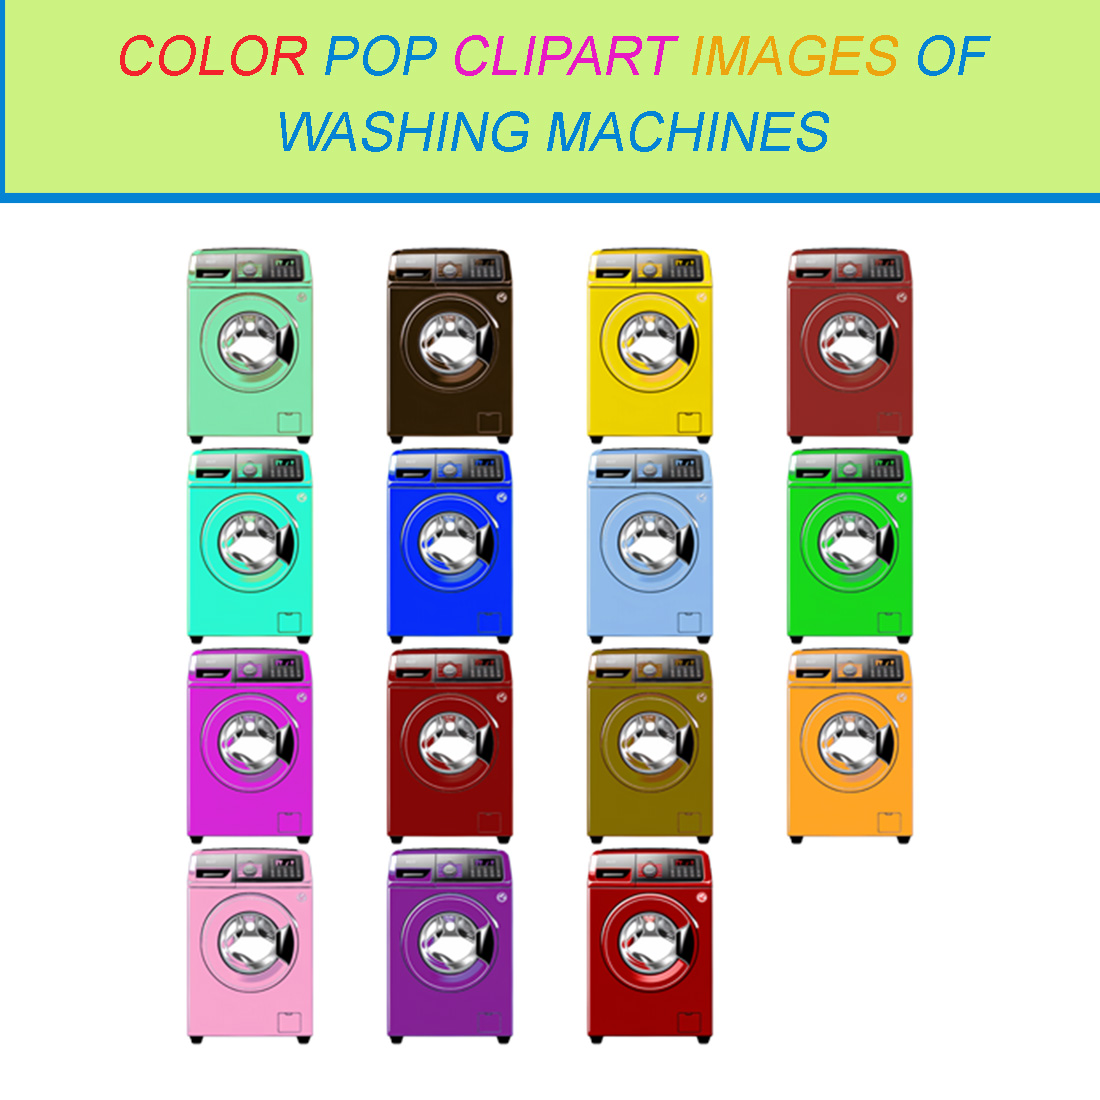 15 COLOR POP CLIPART IMAGES OF WASHING MACHINES cover image.